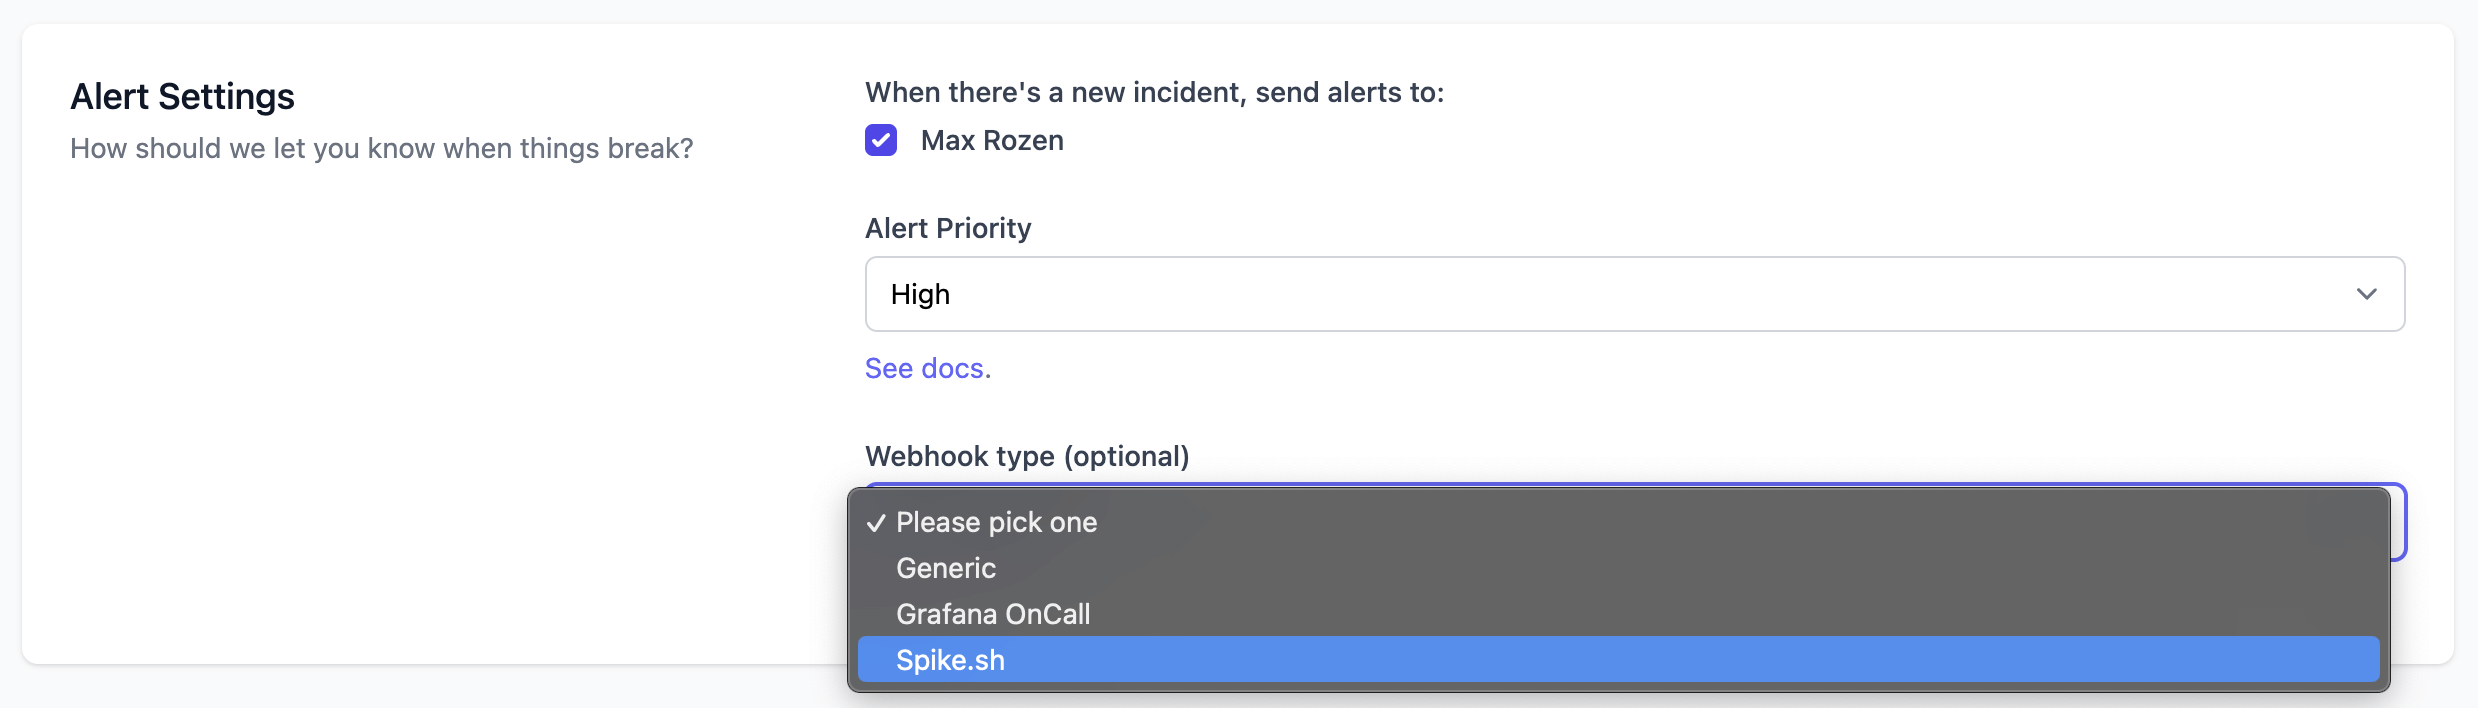 OnlineOrNot Webhook selection for Spike